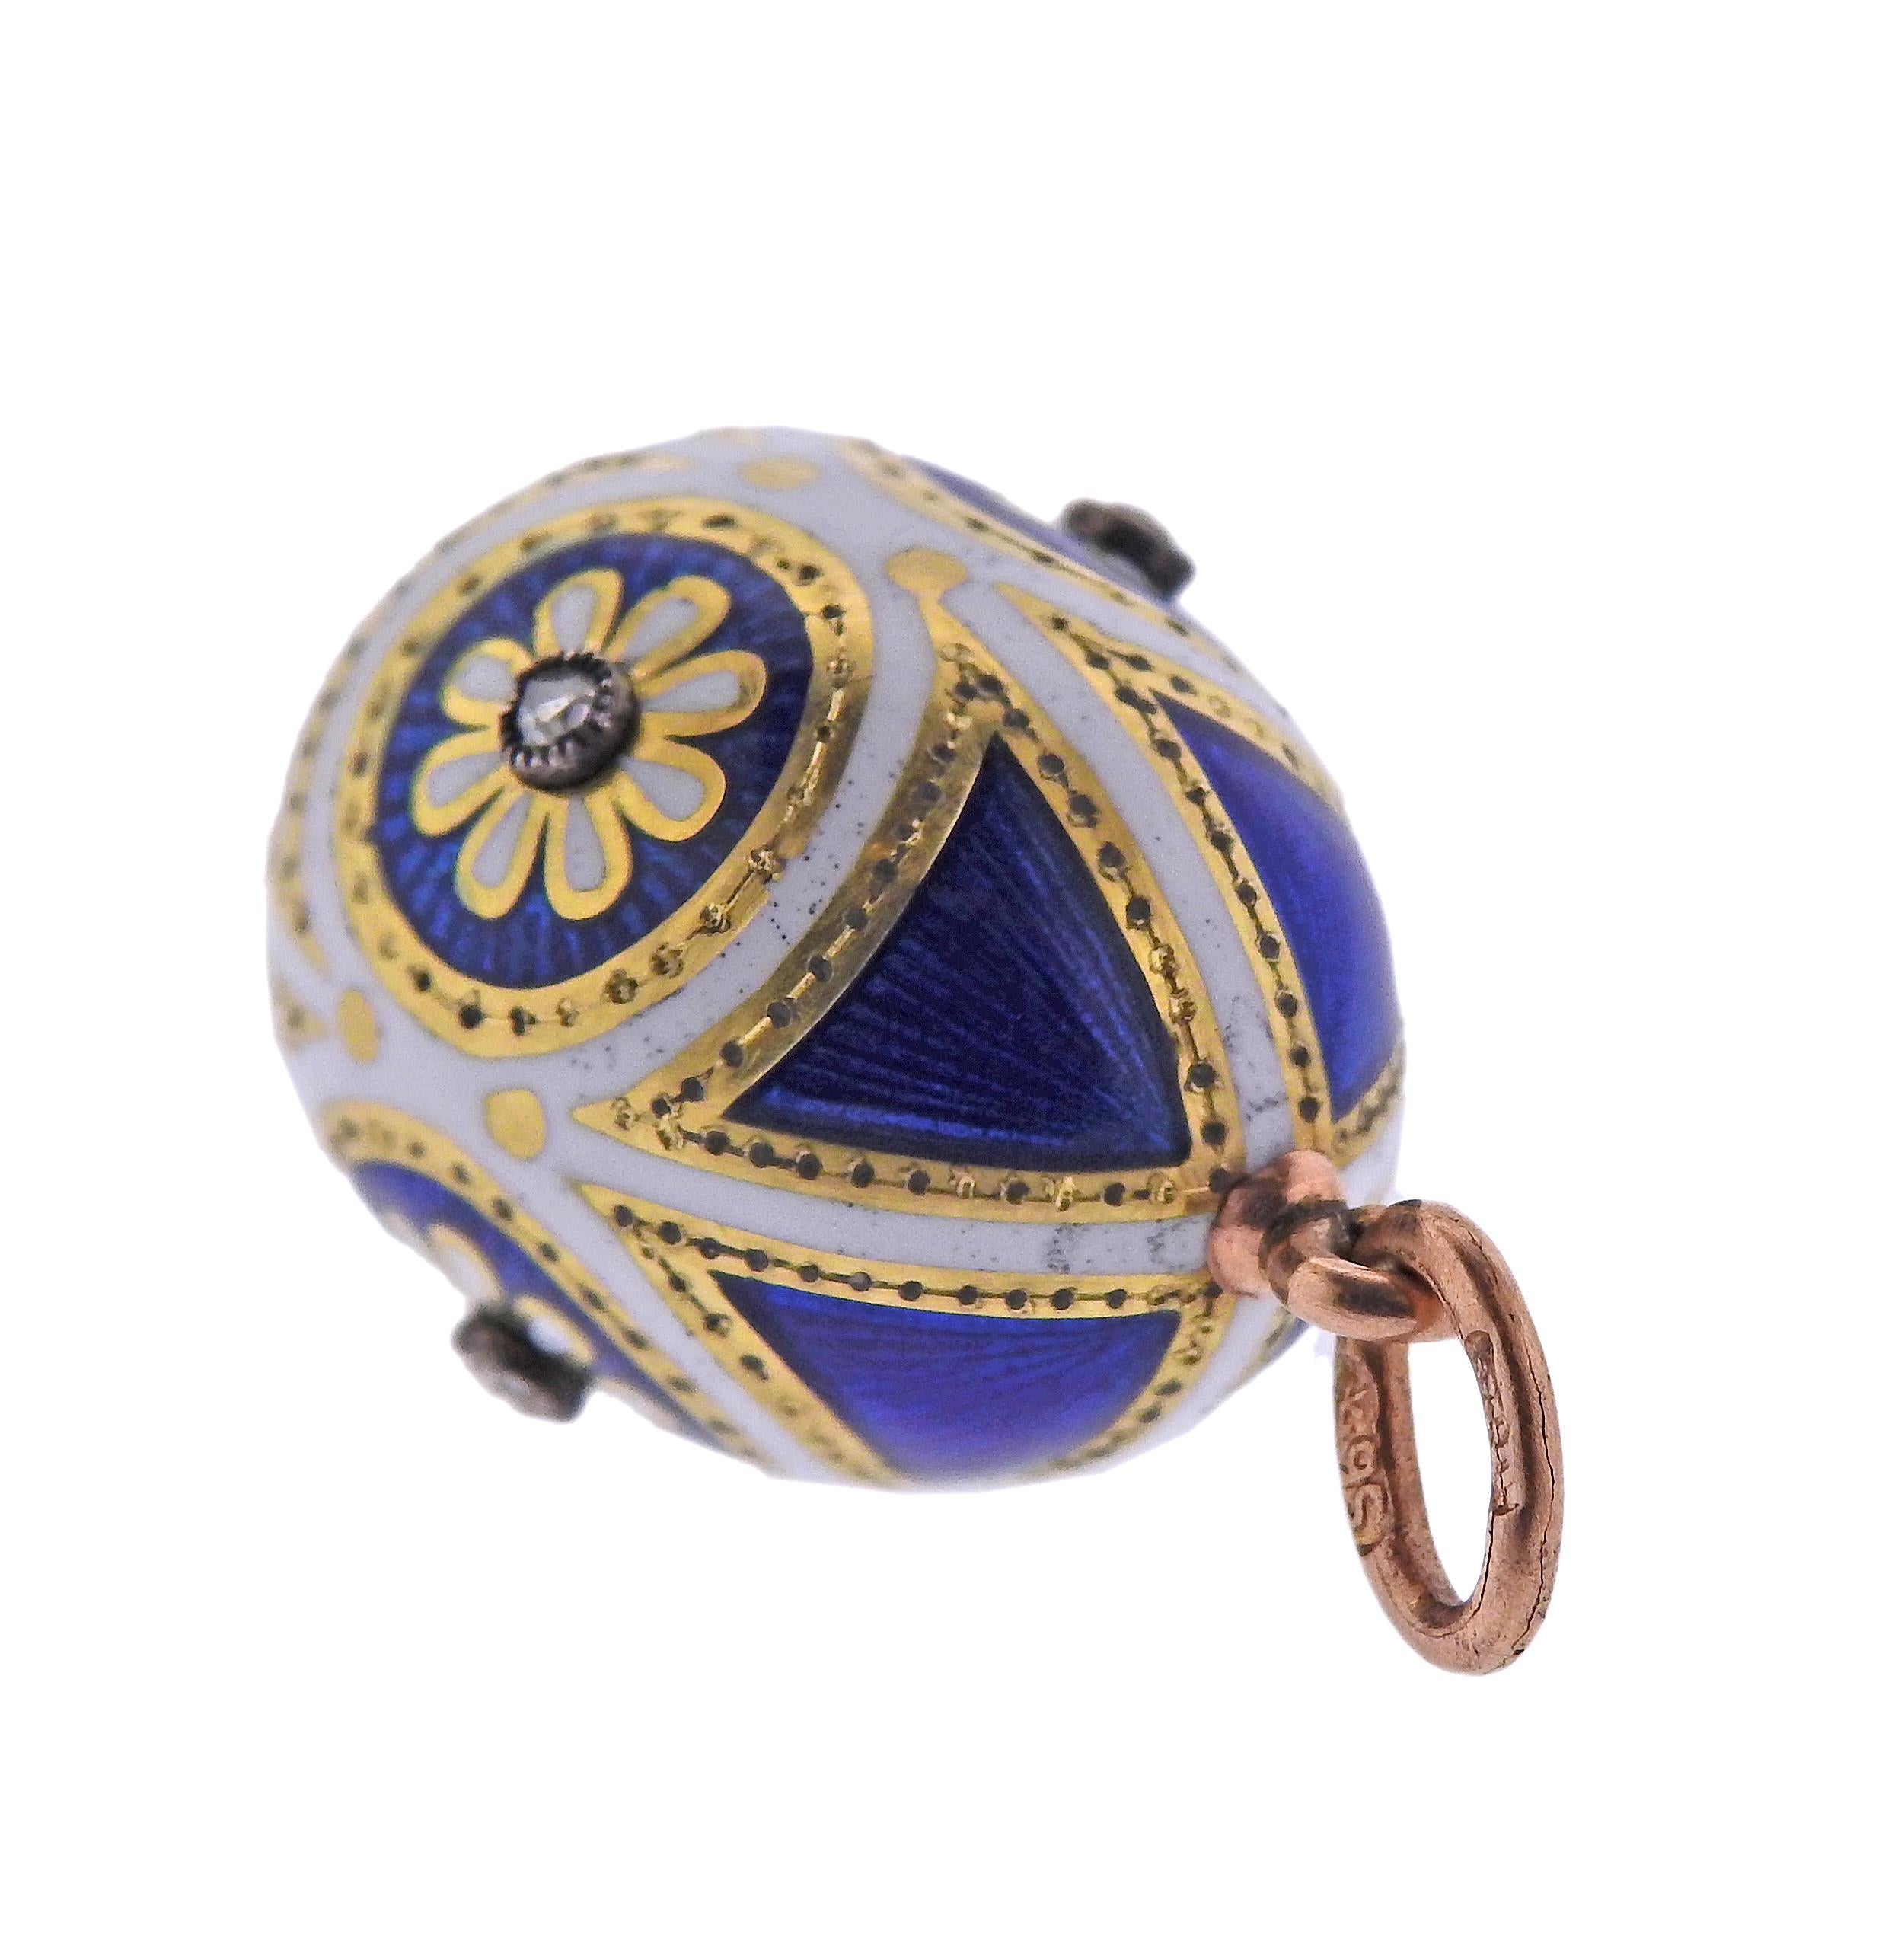 Antique Russian 18k gold and silver egg pendant, with blue and white enamel ornament and rose cut diamonds. Pendant measures 26mm long with bale x 14.5mm in diameter of the center/widest point. Marked with Russian hallmarks on the bale. Weight -